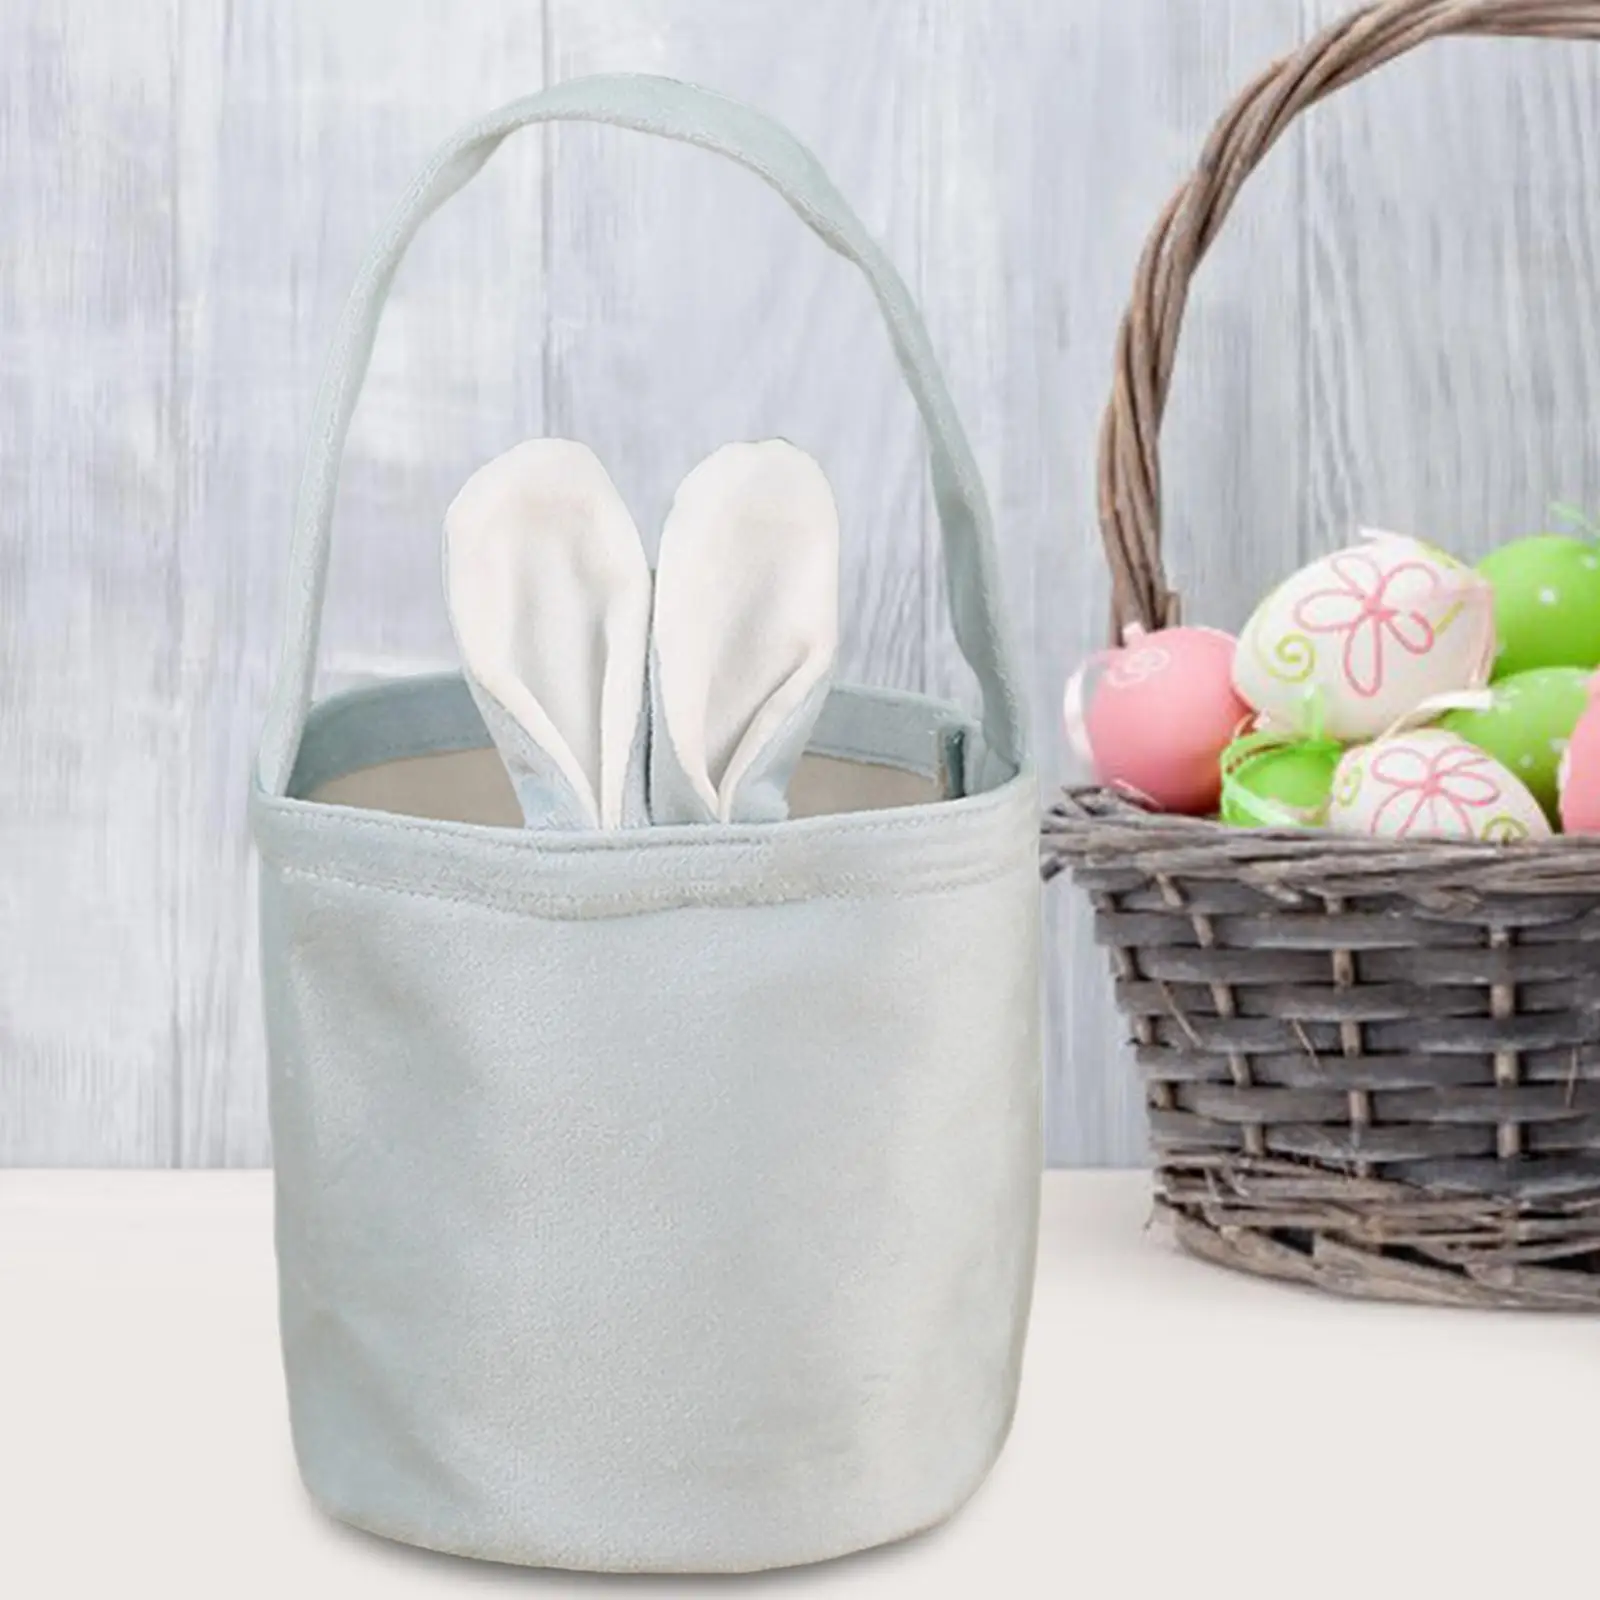 Bunny Ears Basket Kids Party Gift Bags Party Supplies Baby Showers Reusable Easter Egg Basket Easter Gift Easter Rabbit Tote Bag